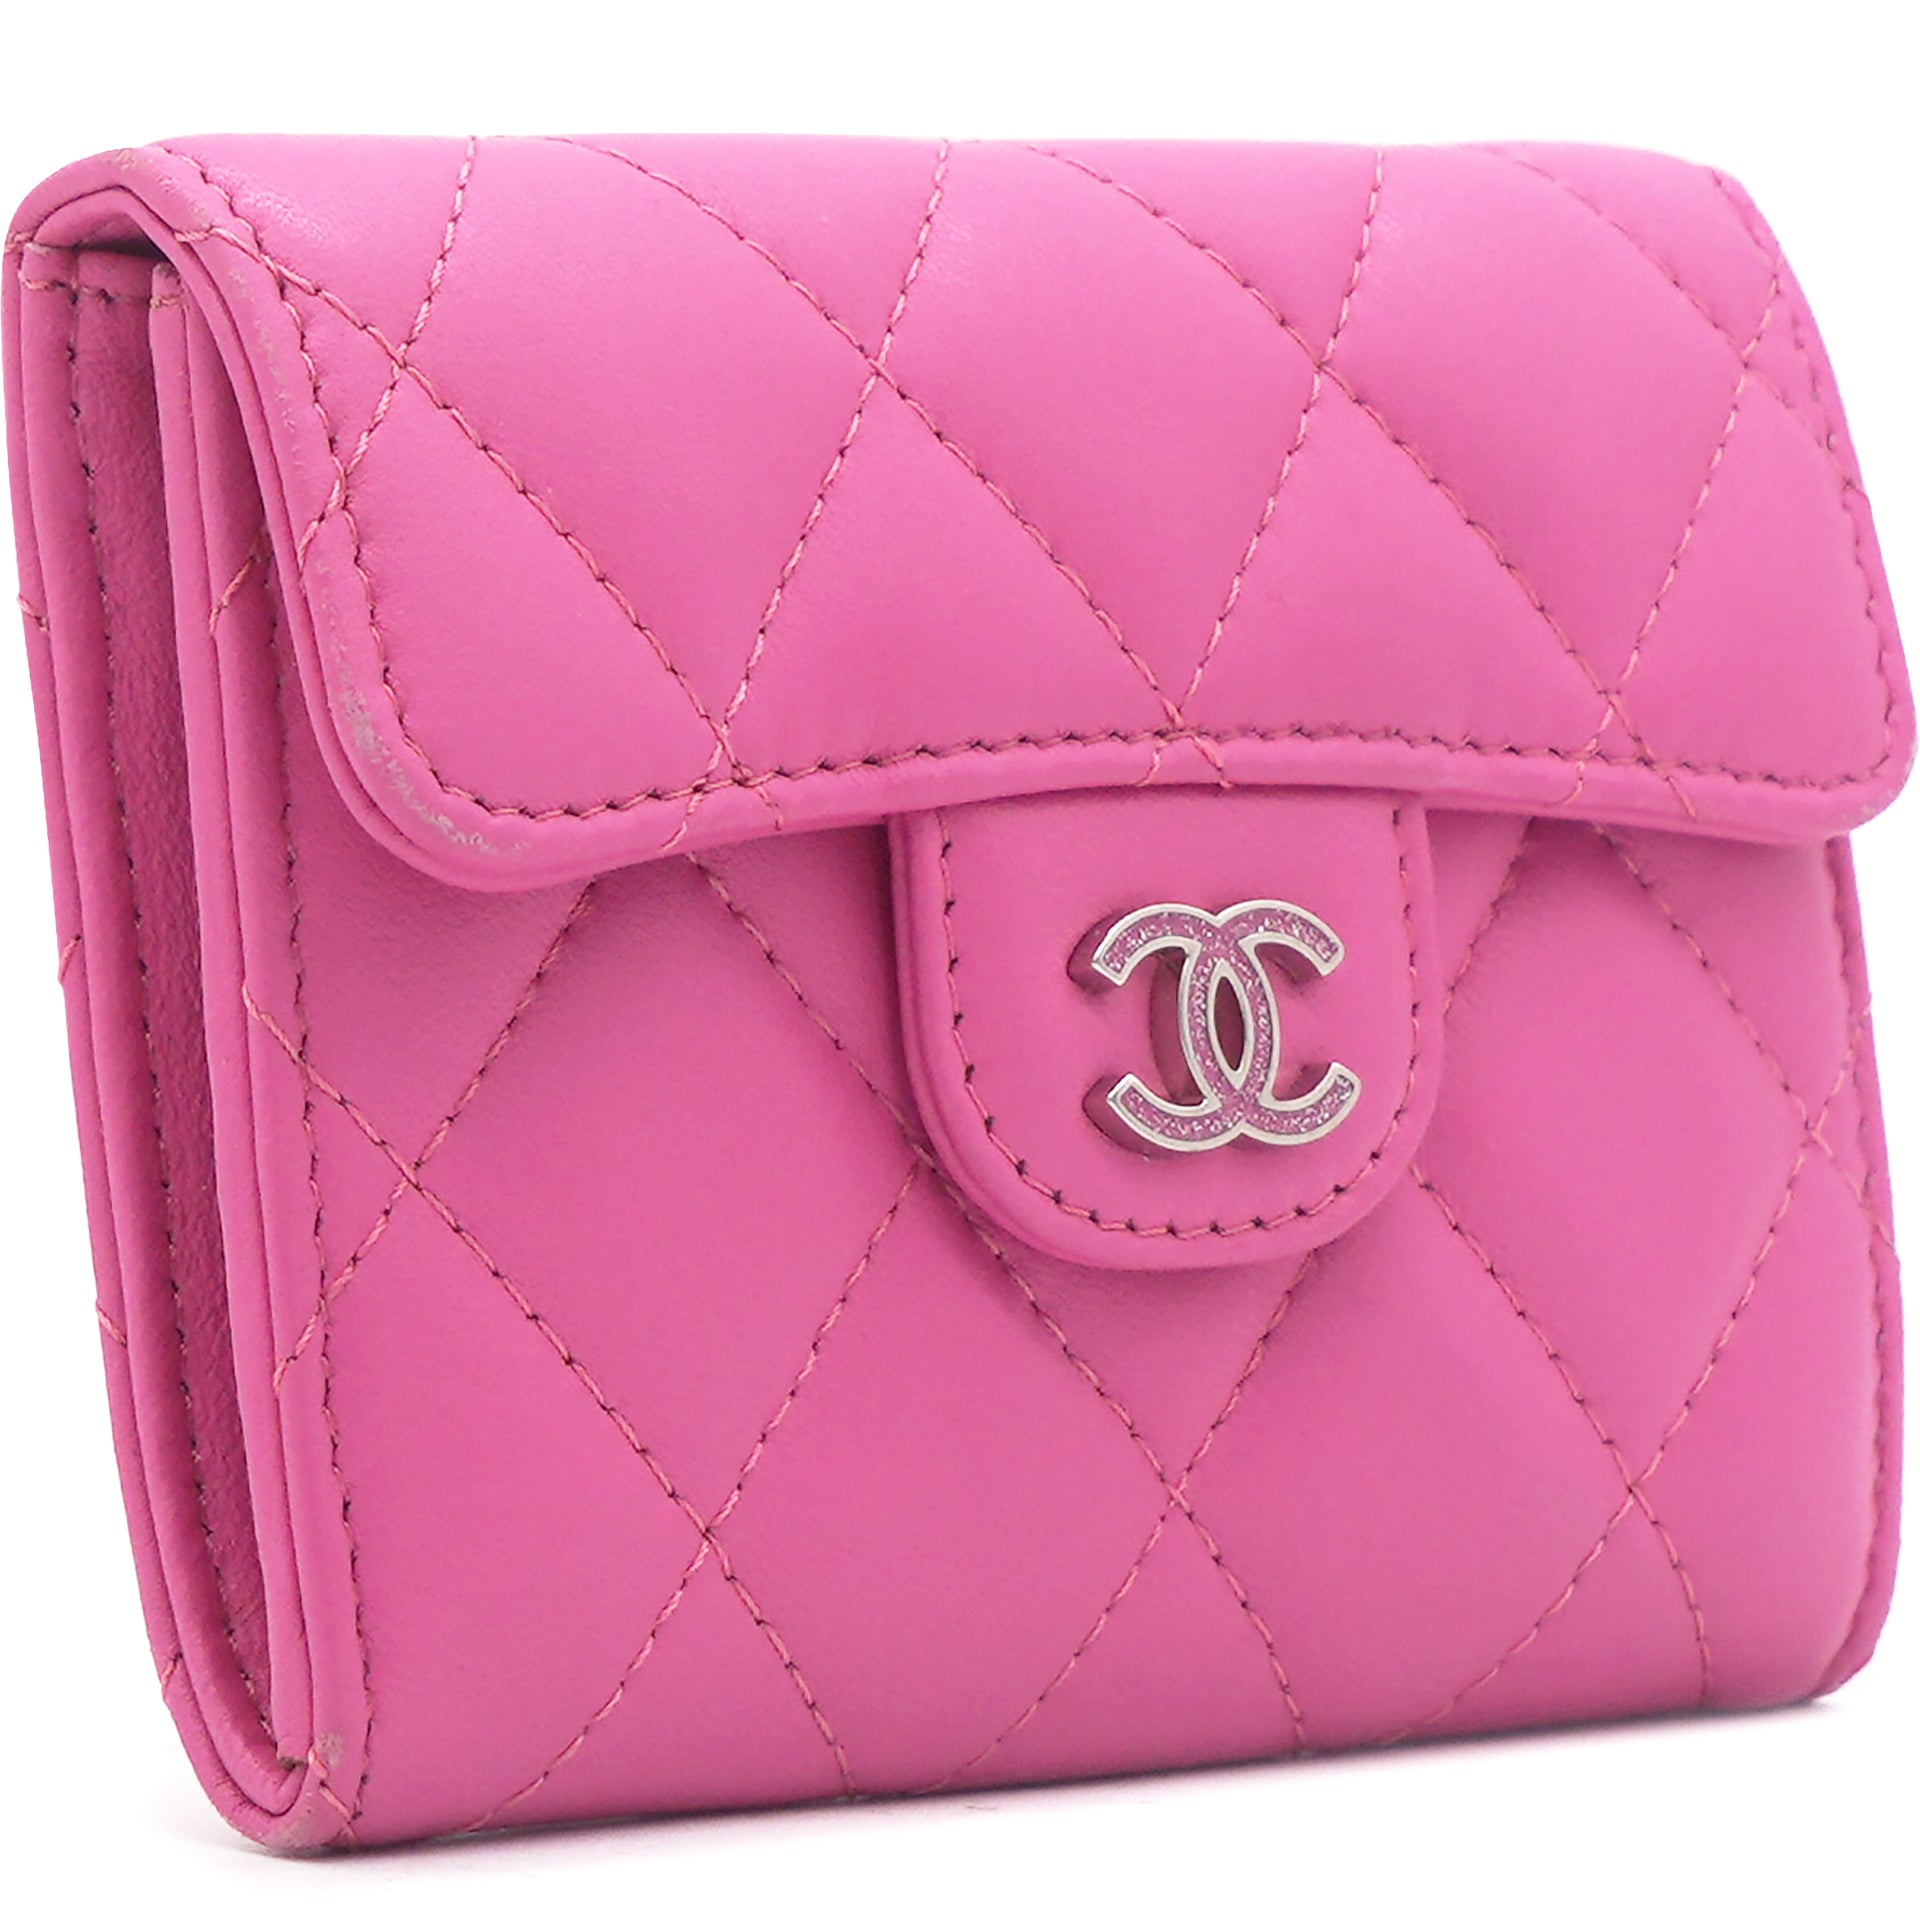 CHANEL Lambskin Quilted Card Holder Purple 1257349